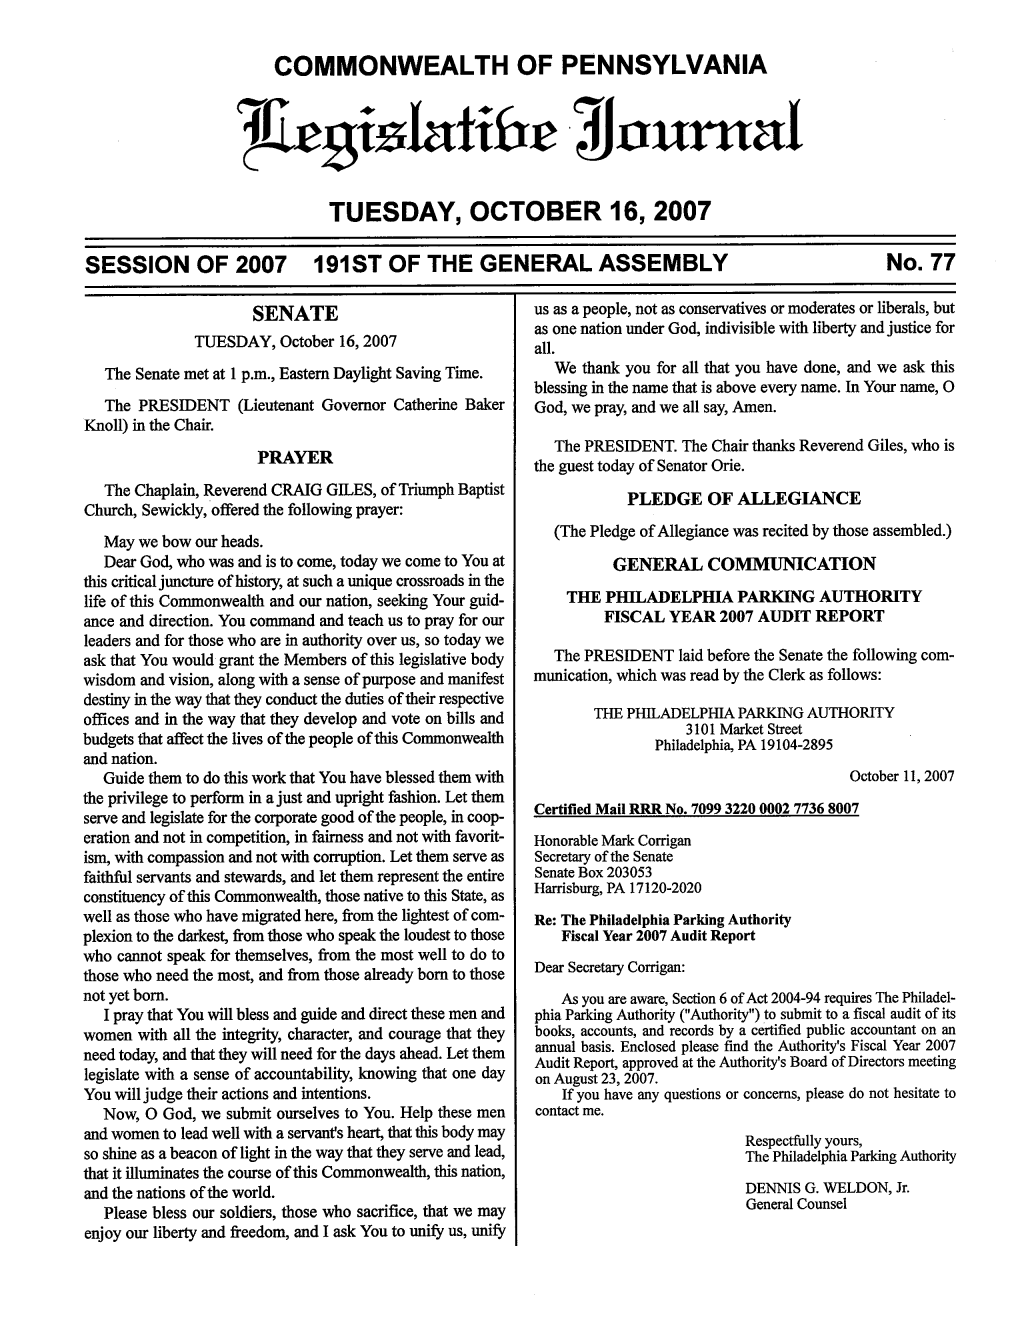 Tieislatitre Lountat TUESDAY, OCTOBER 16, 2007 SESSION of 2007 191ST of the GENERAL ASSEMBLY No